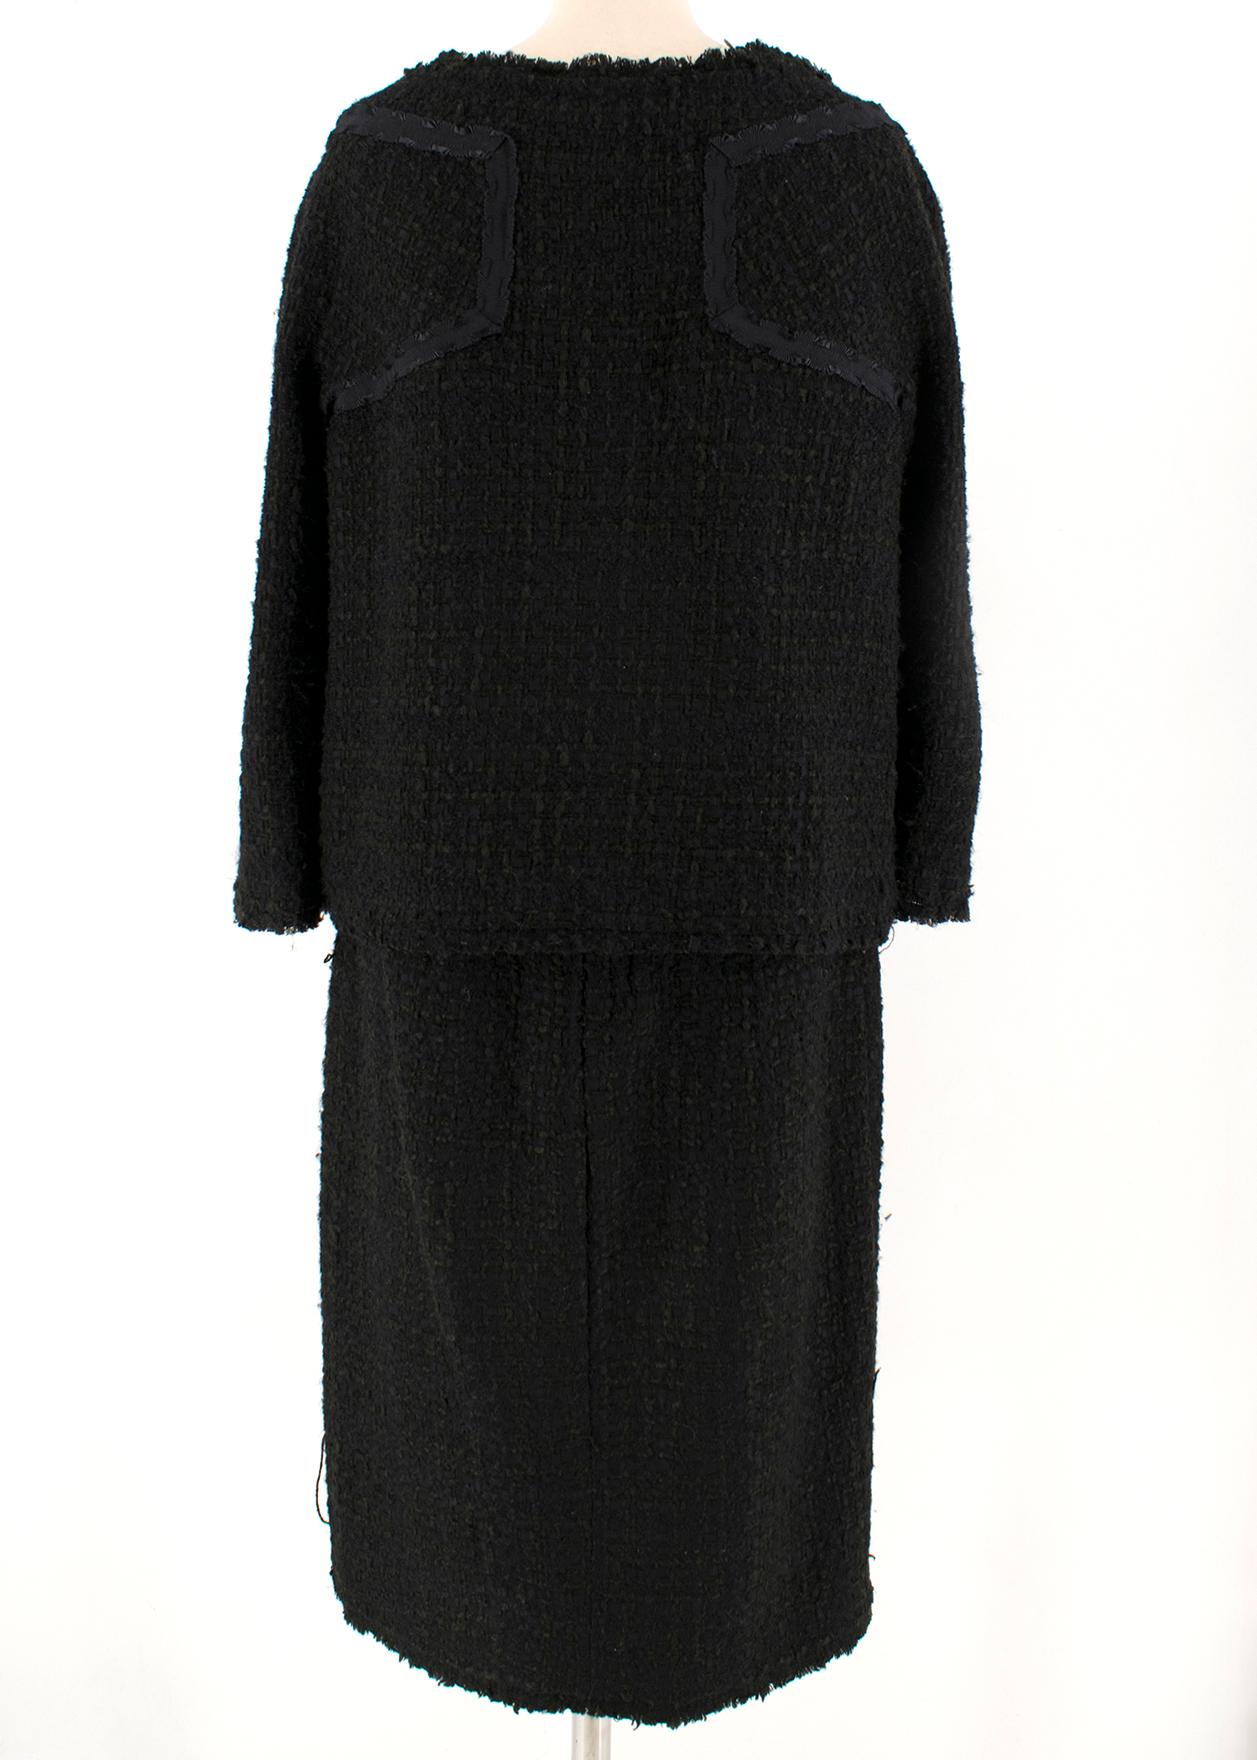 Alberta Ferretti Black Tweed Jacket & Skirt	- Size US 8 In Good Condition For Sale In London, GB